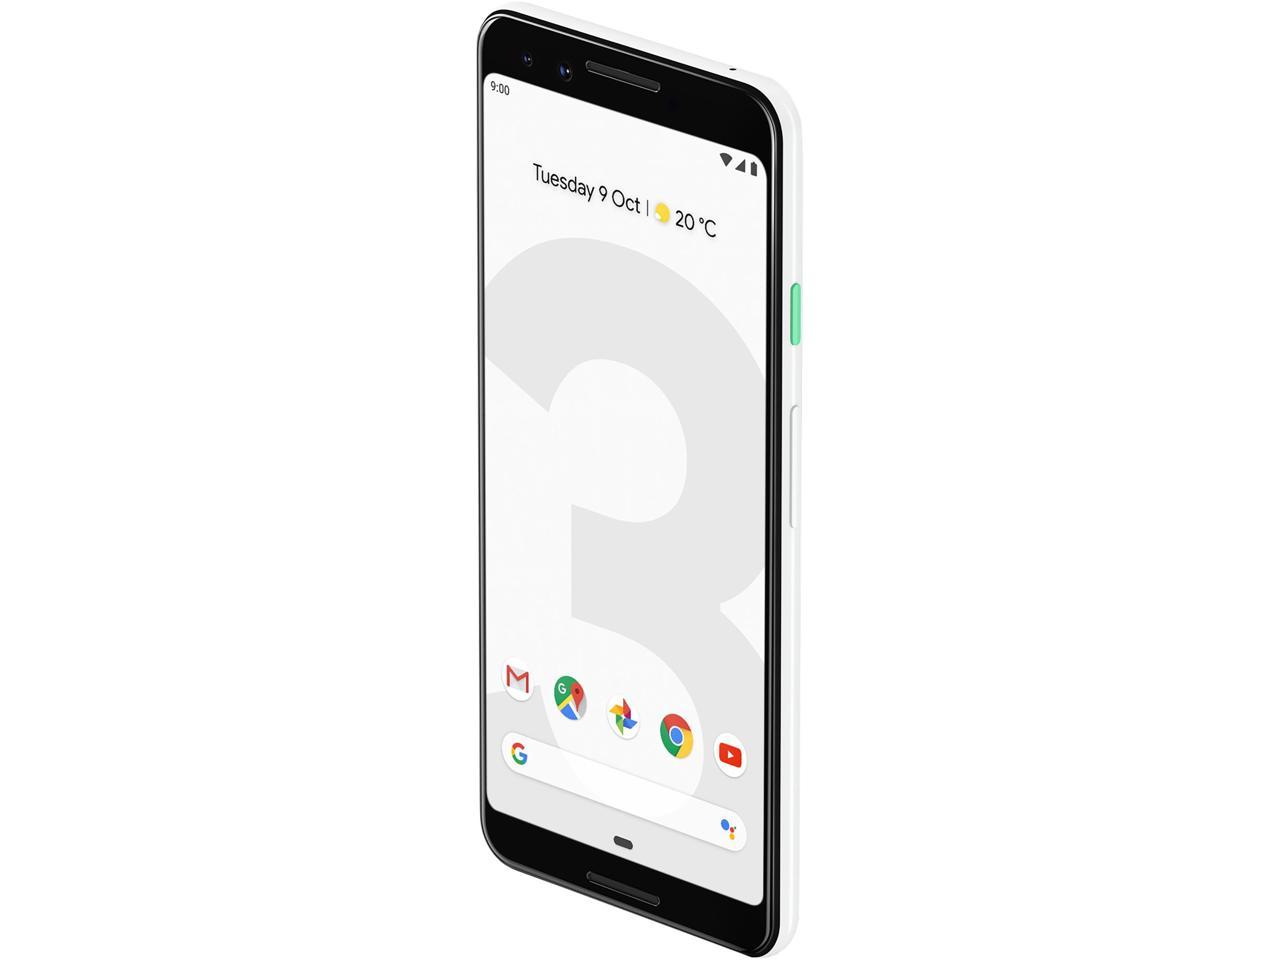 Details about   Google Pixel 3 64GB GSM+CDMA Unlocked 4G LTE Android Smartphone Black/White